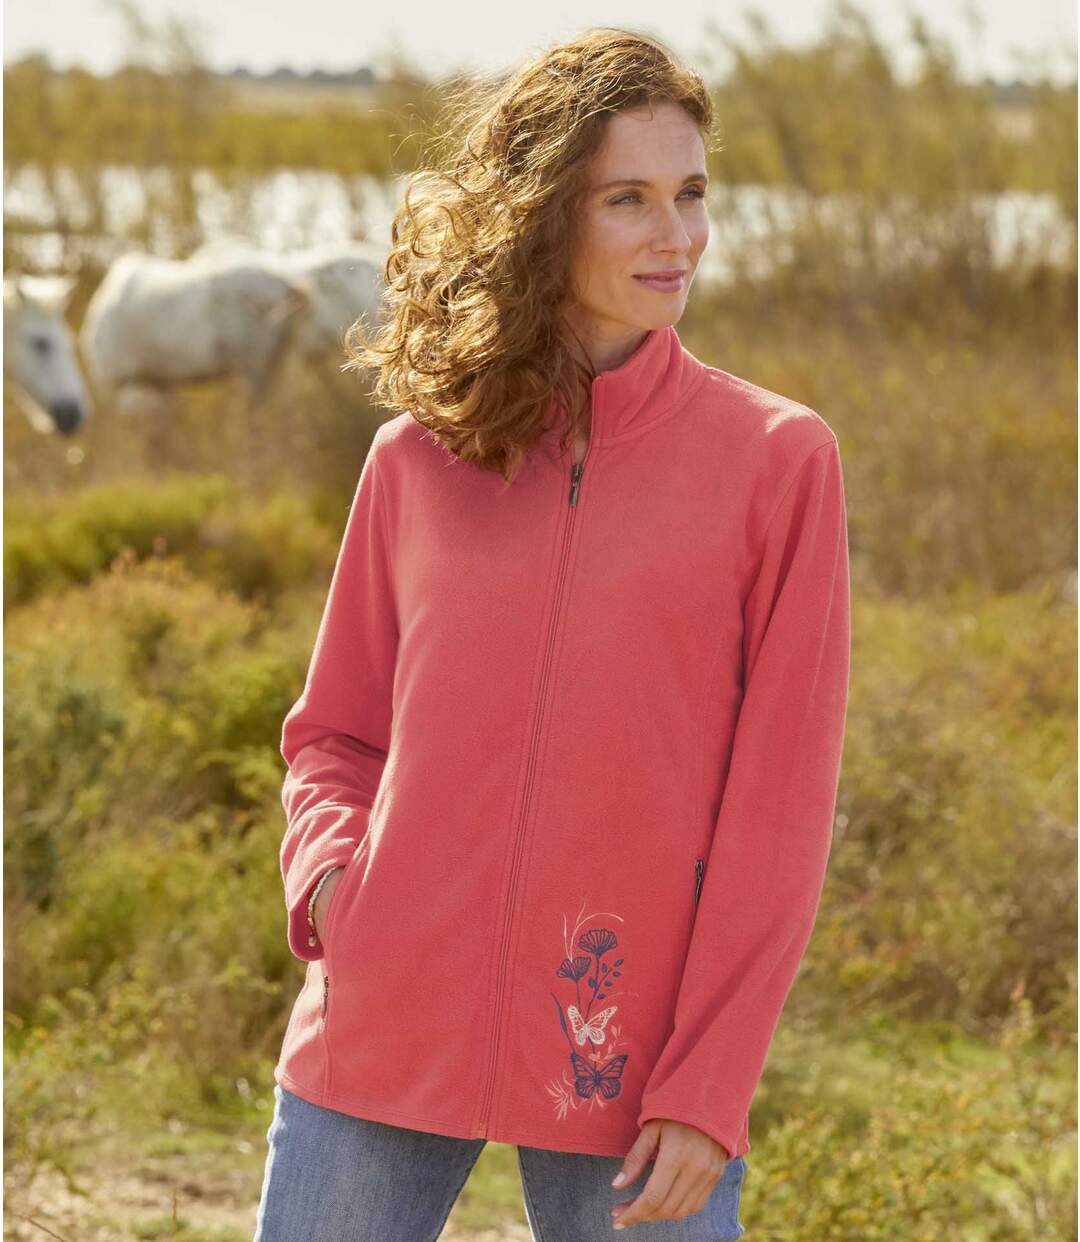 Pack of 2 Women's Embroidered Microfleece Jackets - Blue Pink  Atlas For Men